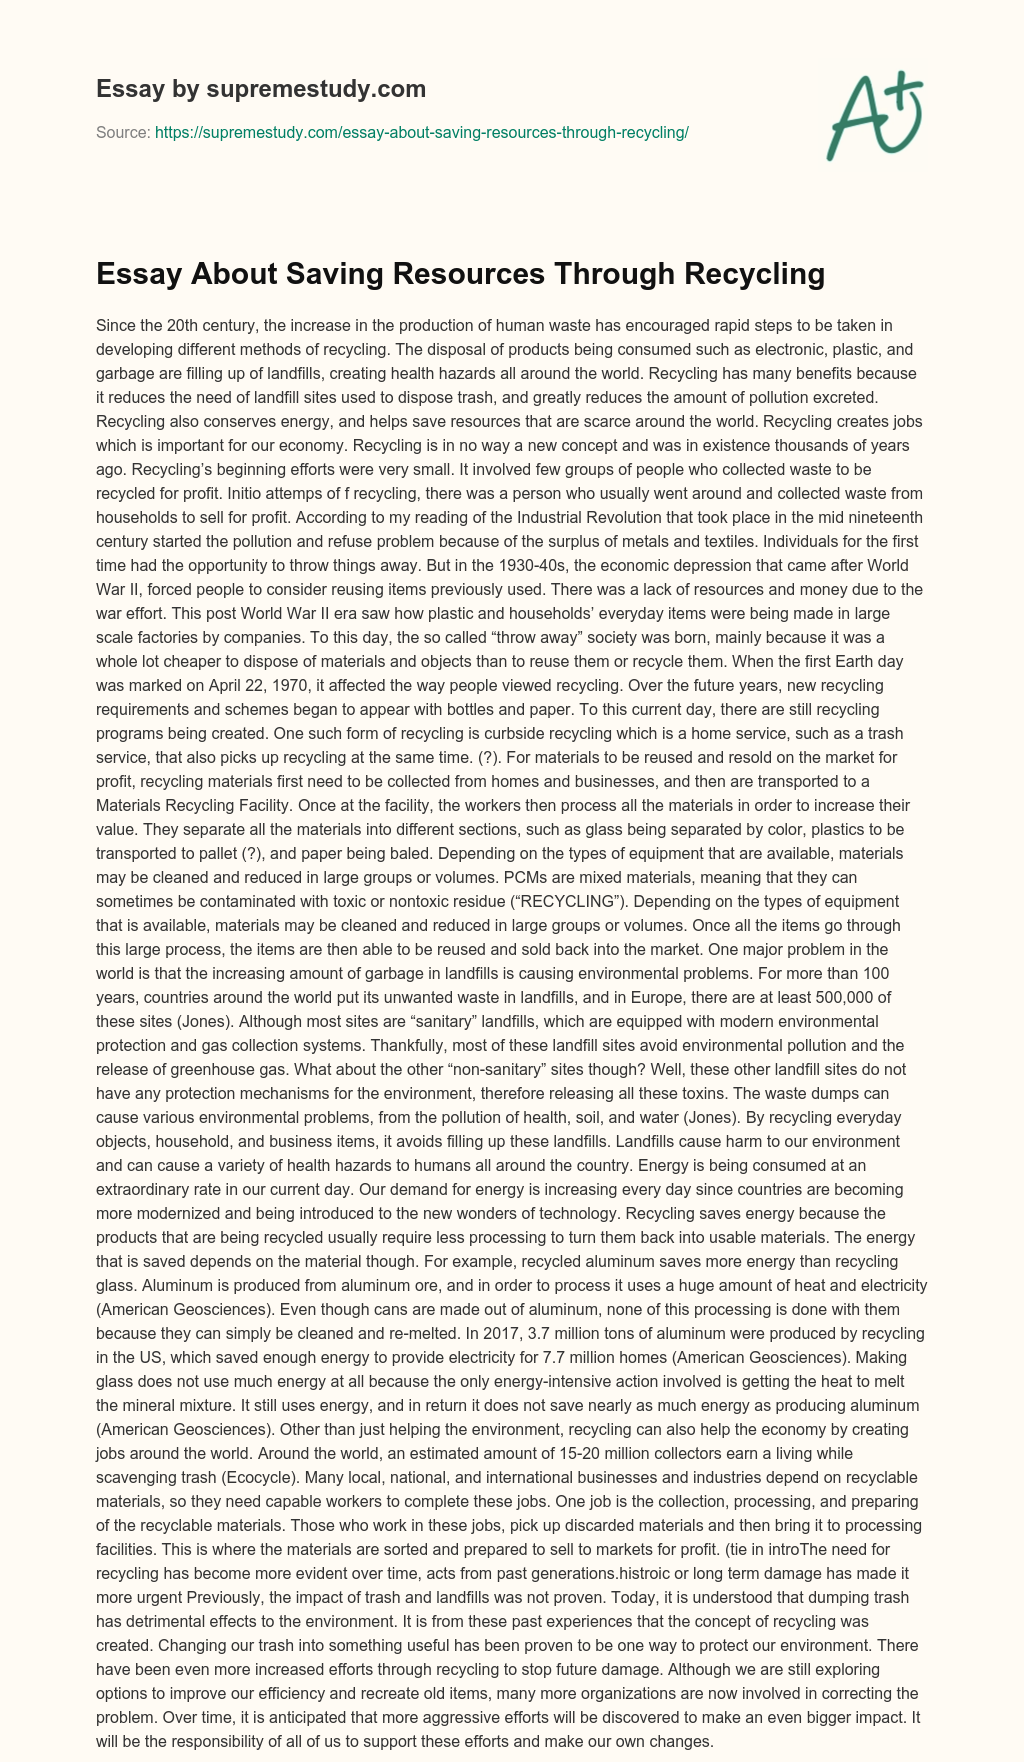 recycling essay 150 words